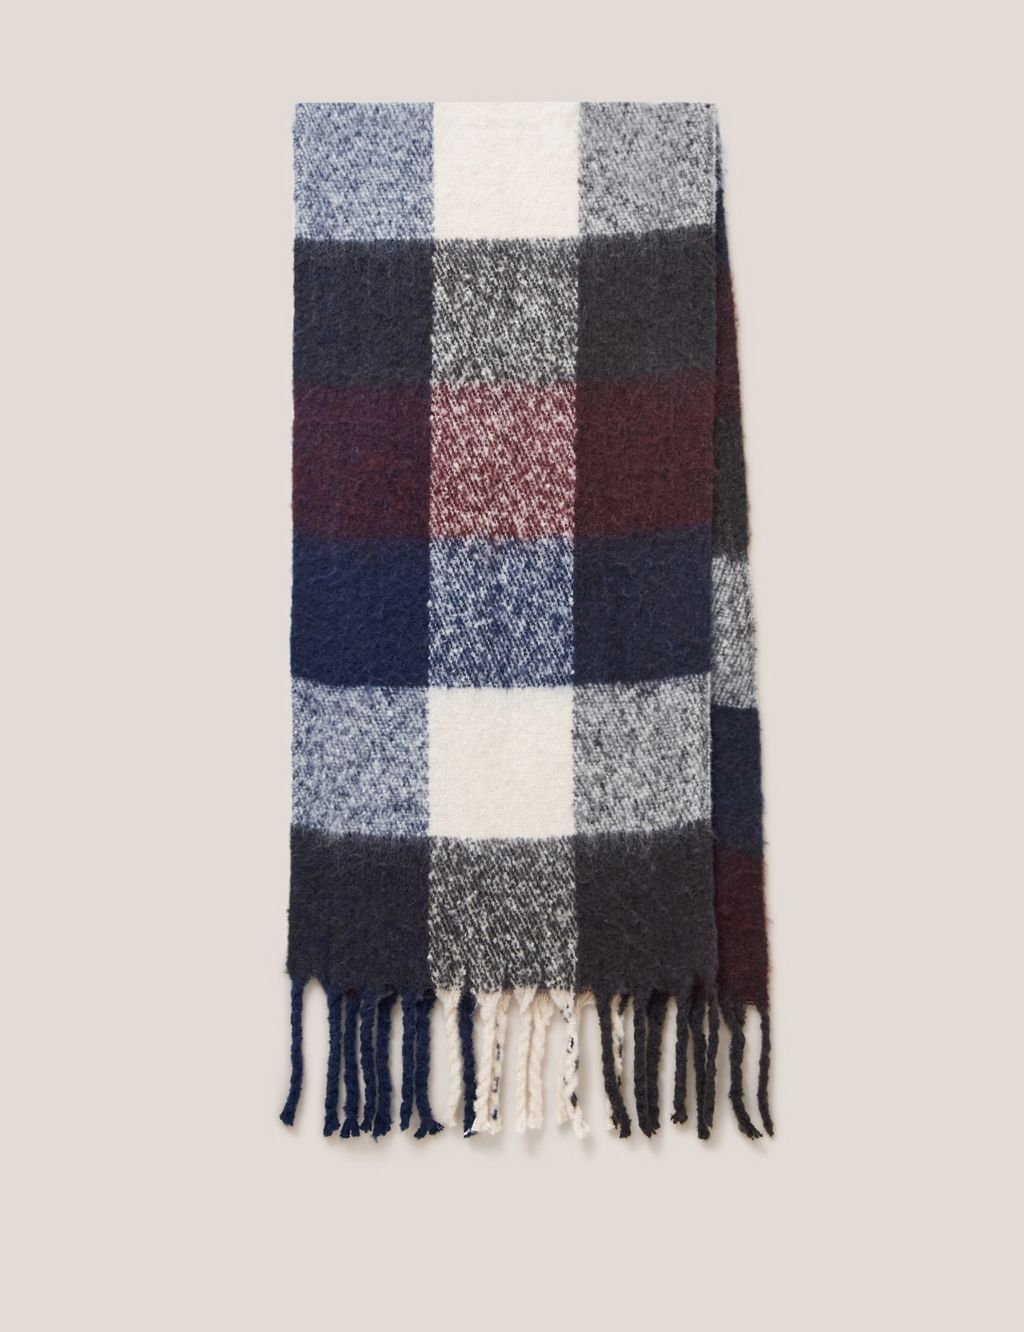 Brushed Checked Tassel Scarf image 2